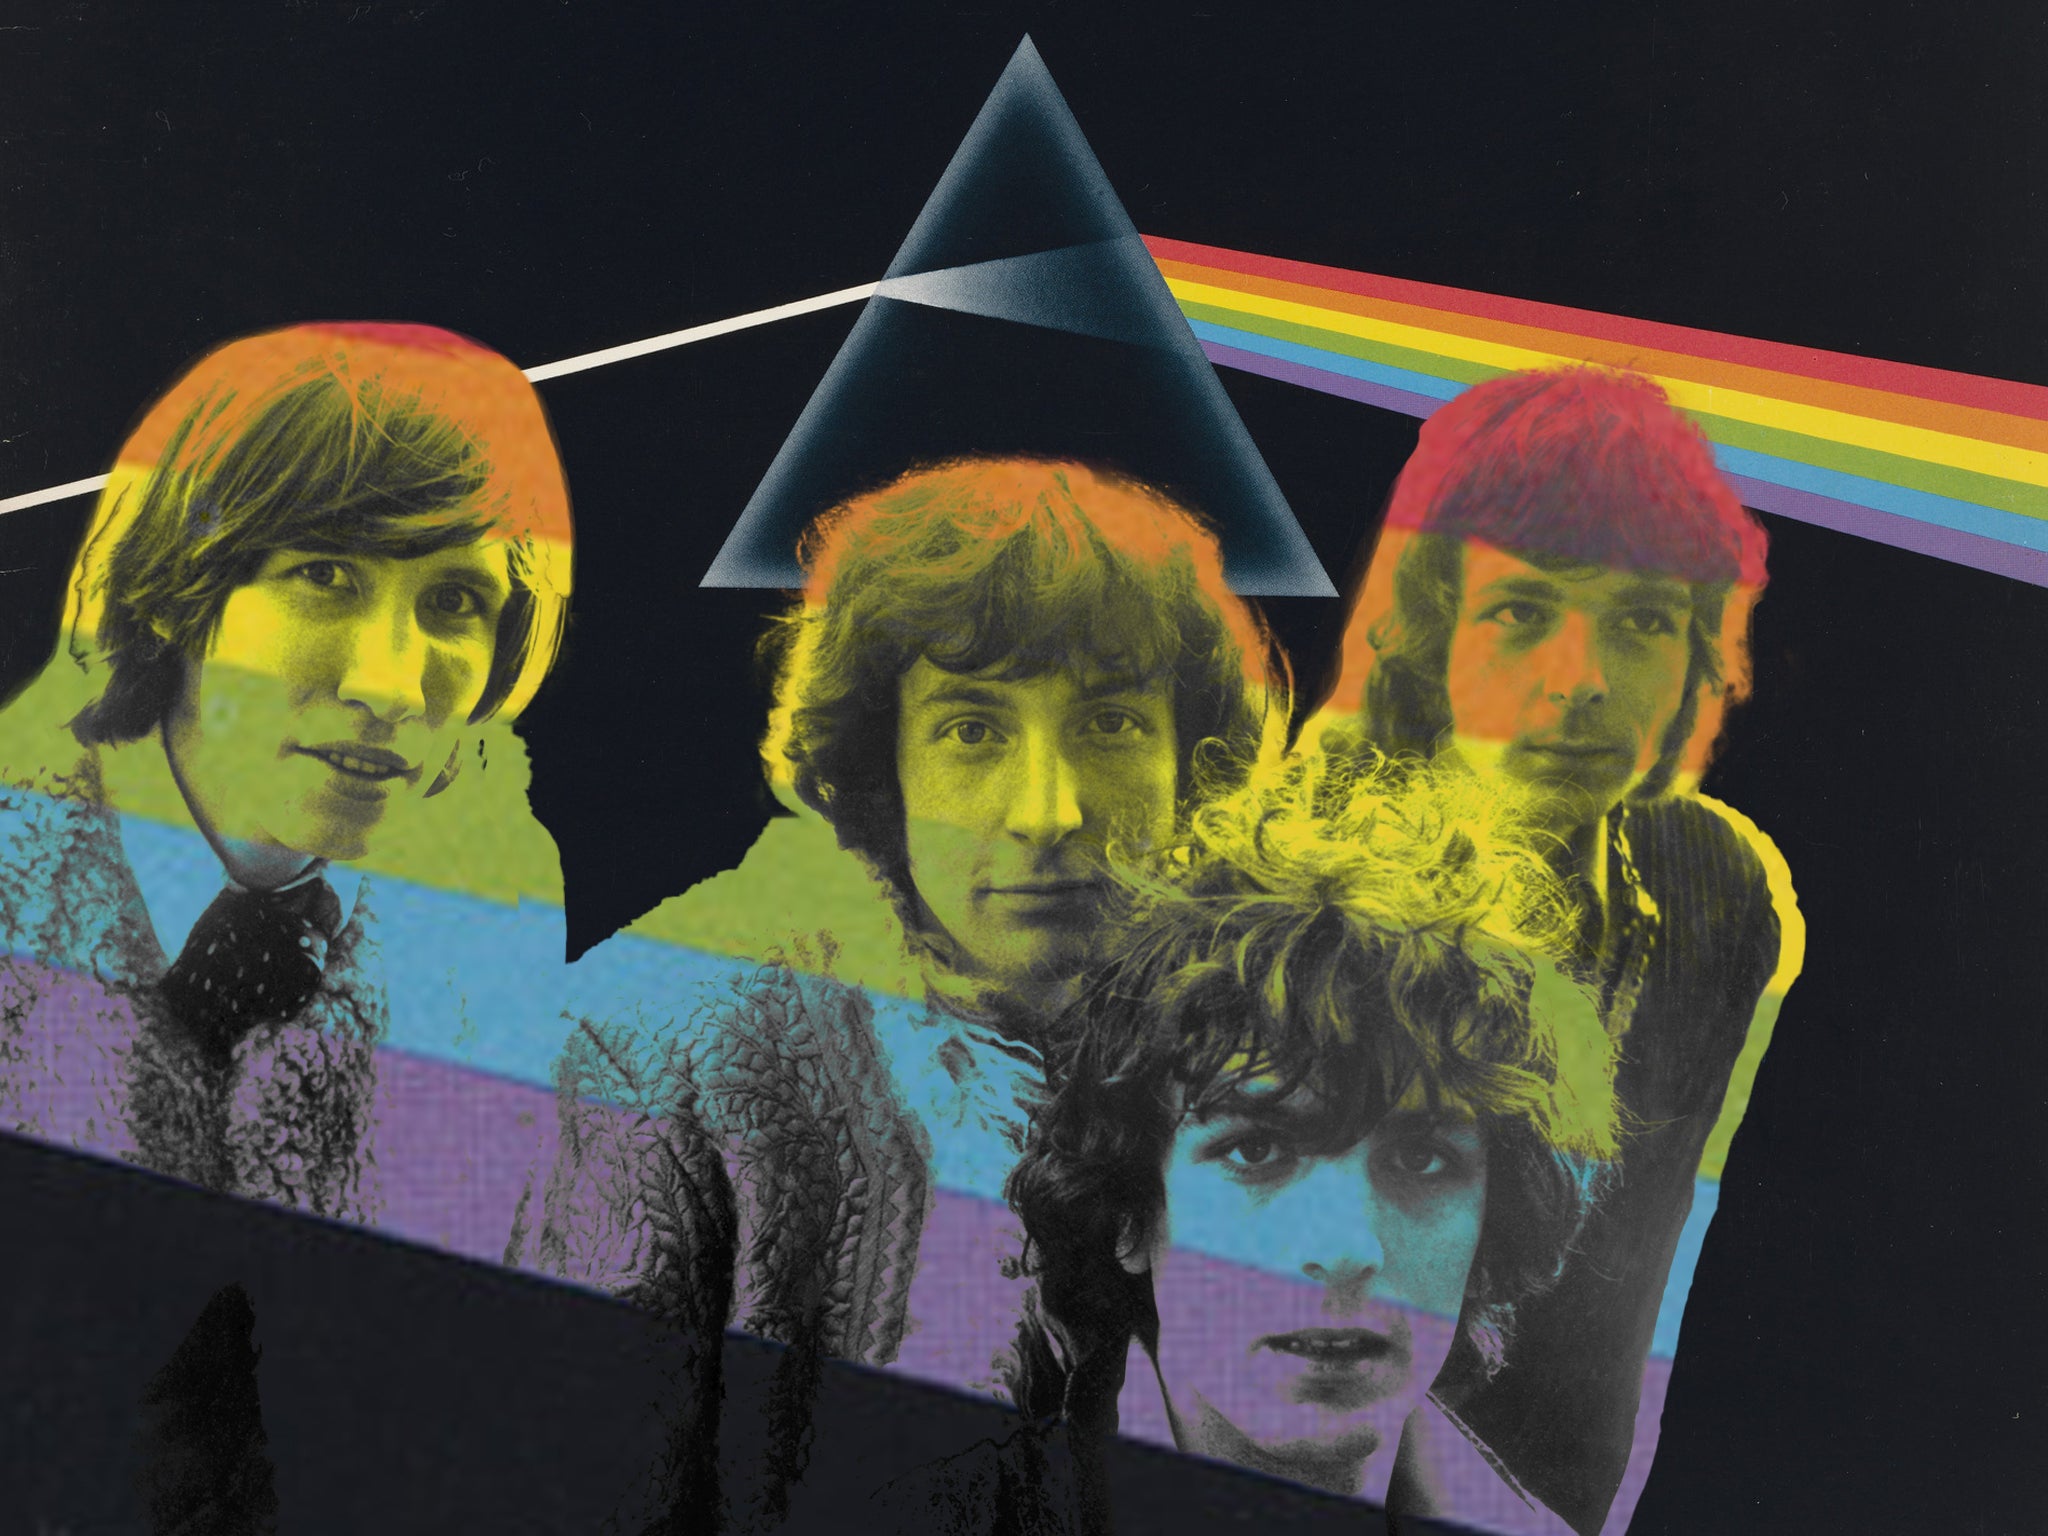 Pink Floyd song reconstructed from person's brain activity | The